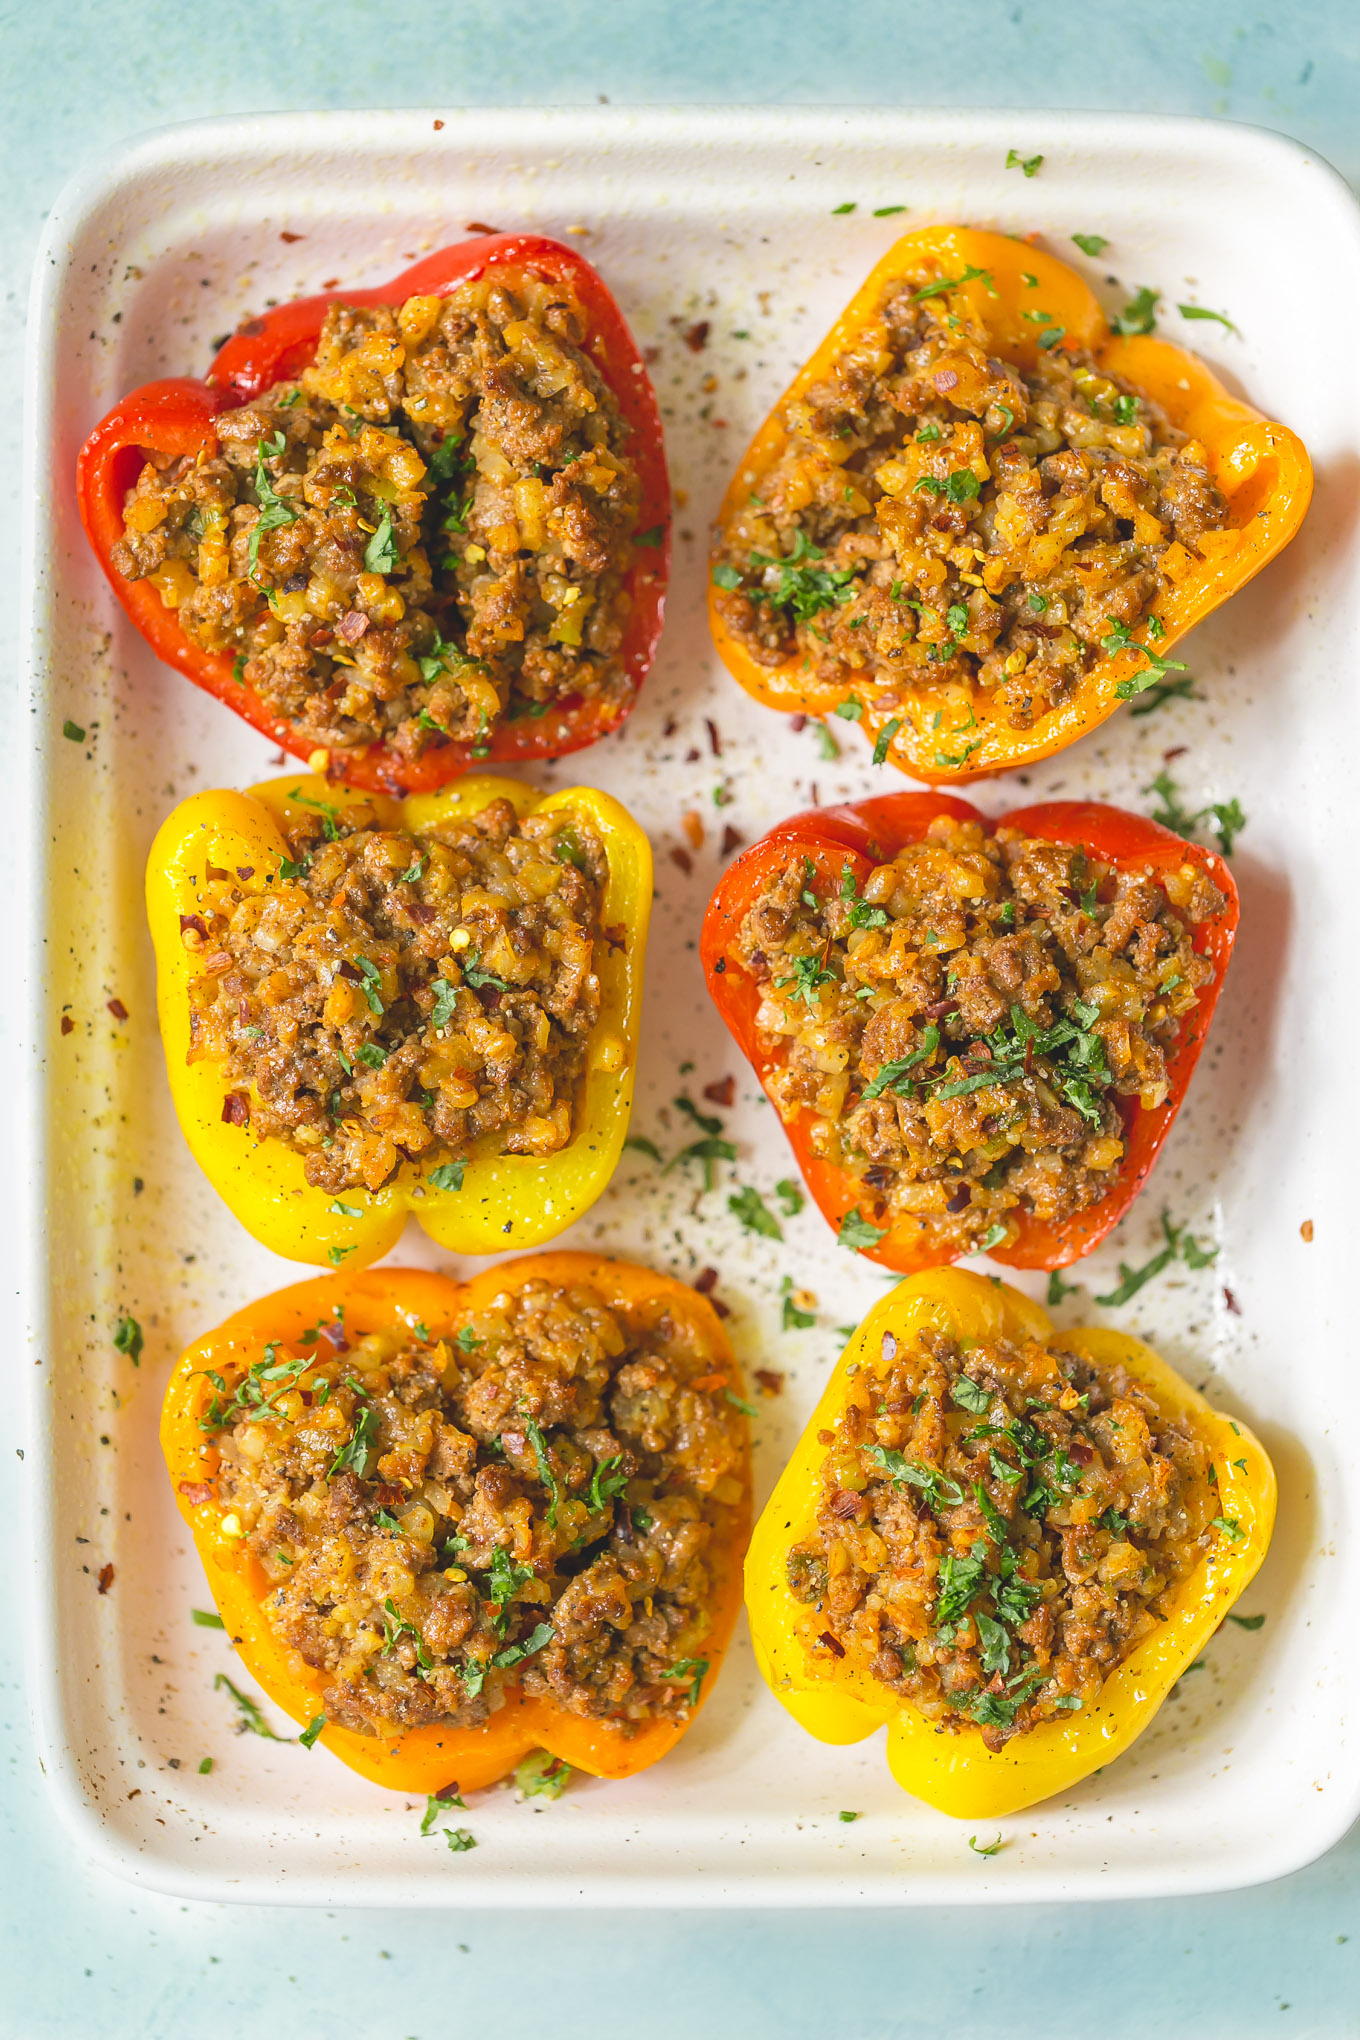 stuffed peppers made with ground lamb